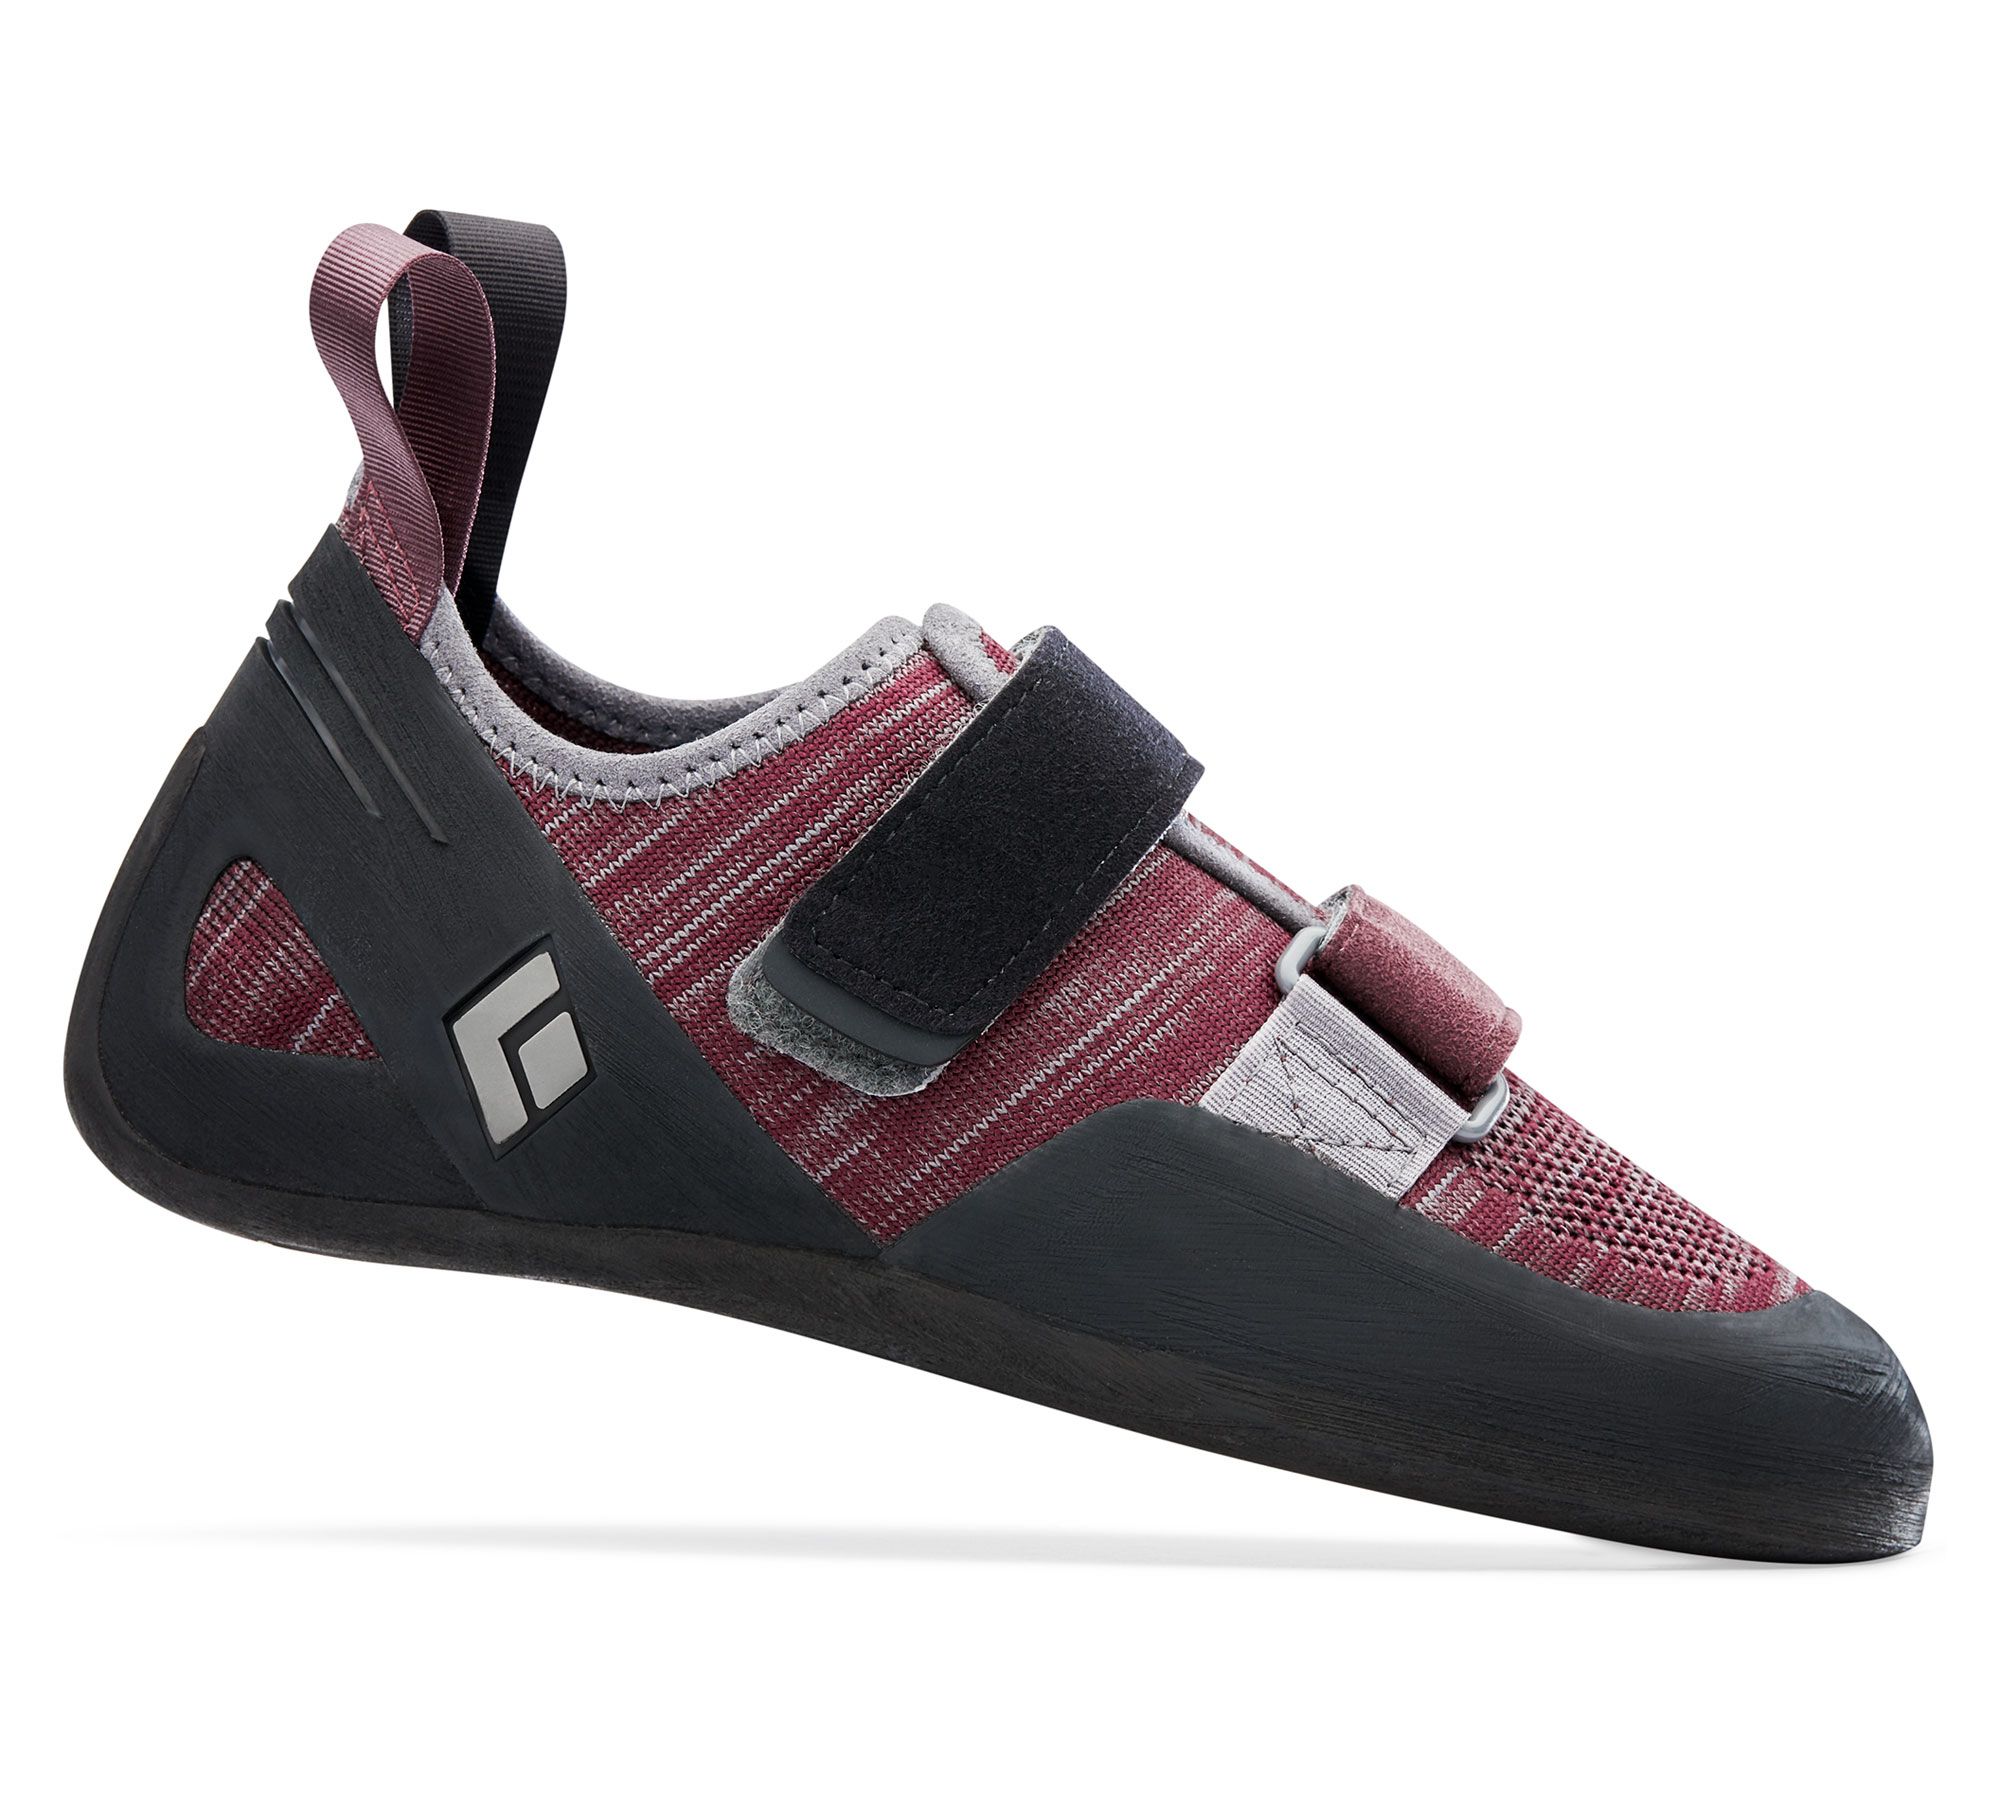 Chaussons d'escalade Momentum Ws